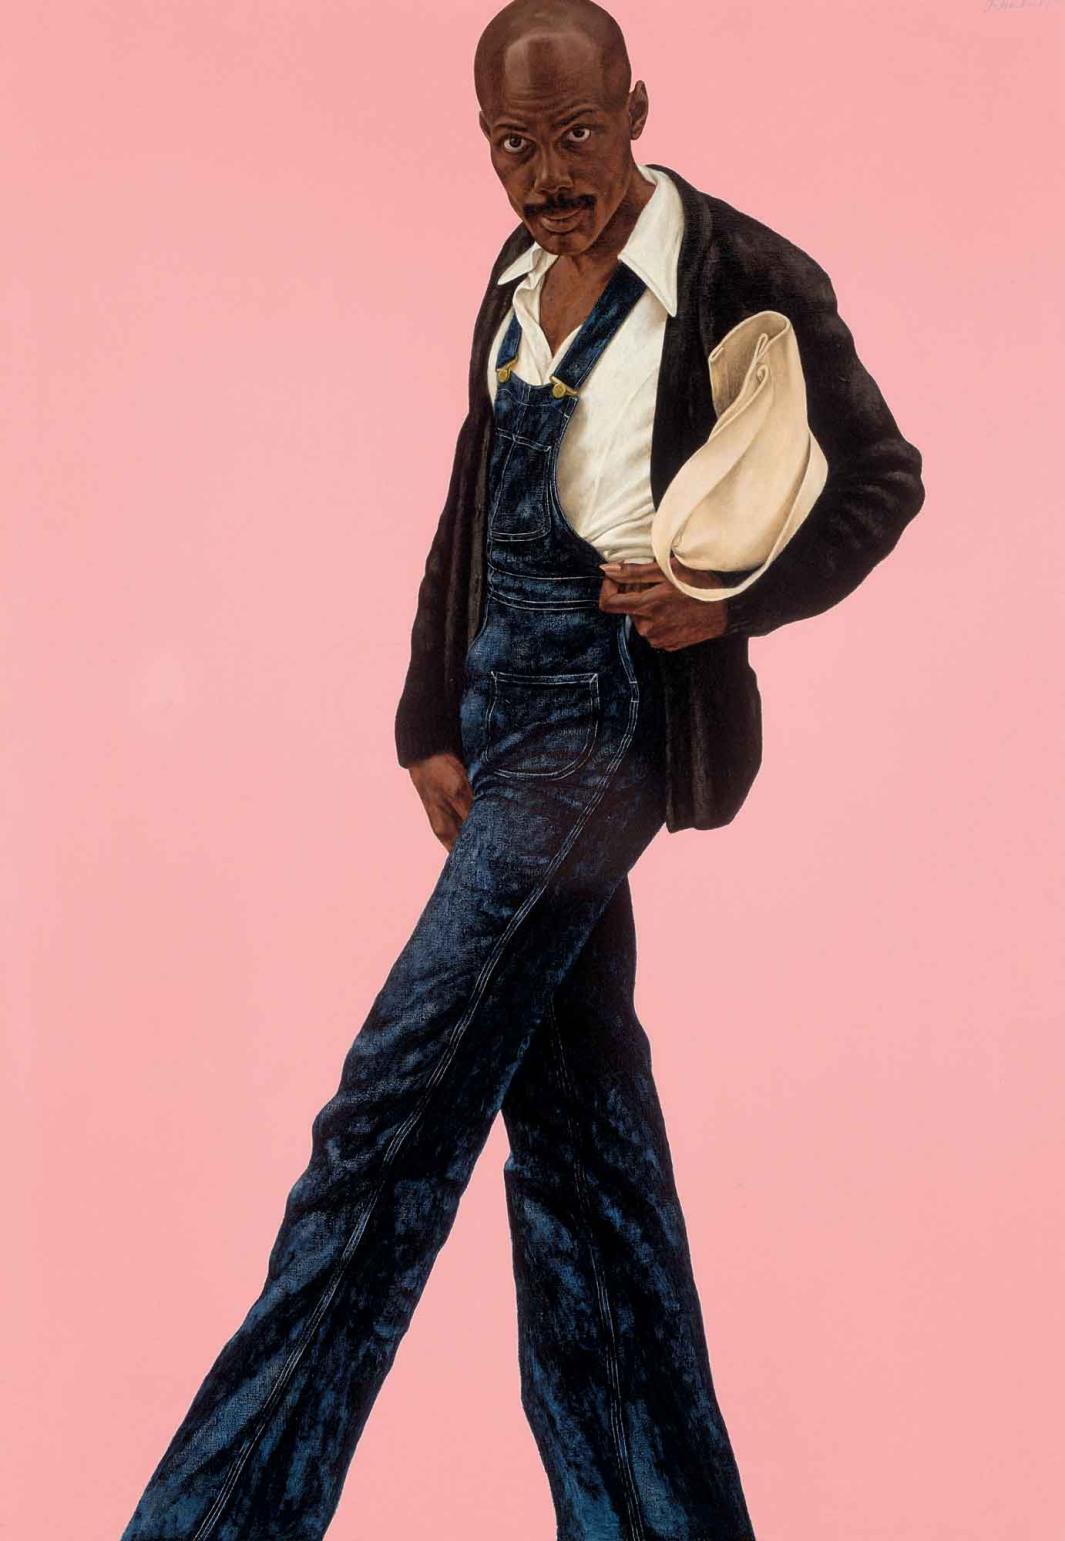 Portrait of a man in overalls with a bag under his left arm against a pink background